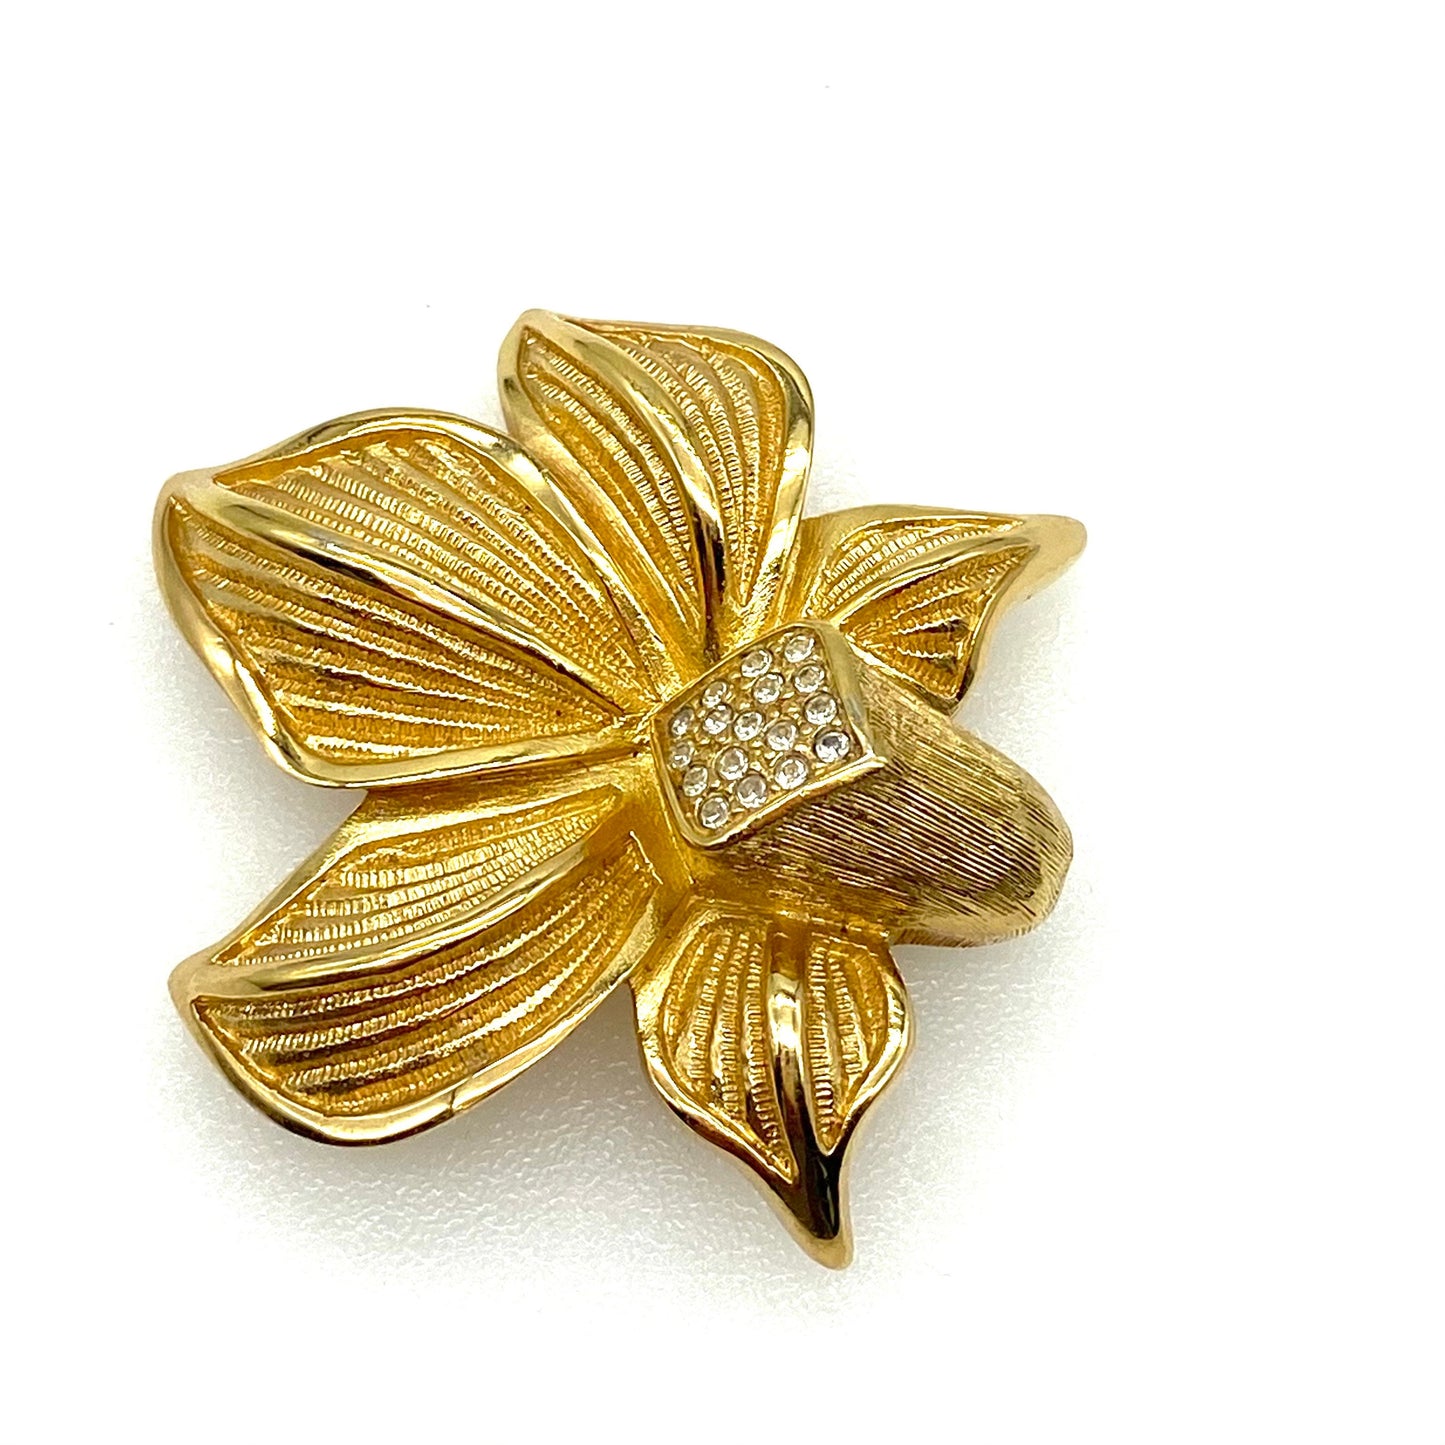 Christian Dior 1980's Orchid Brooch